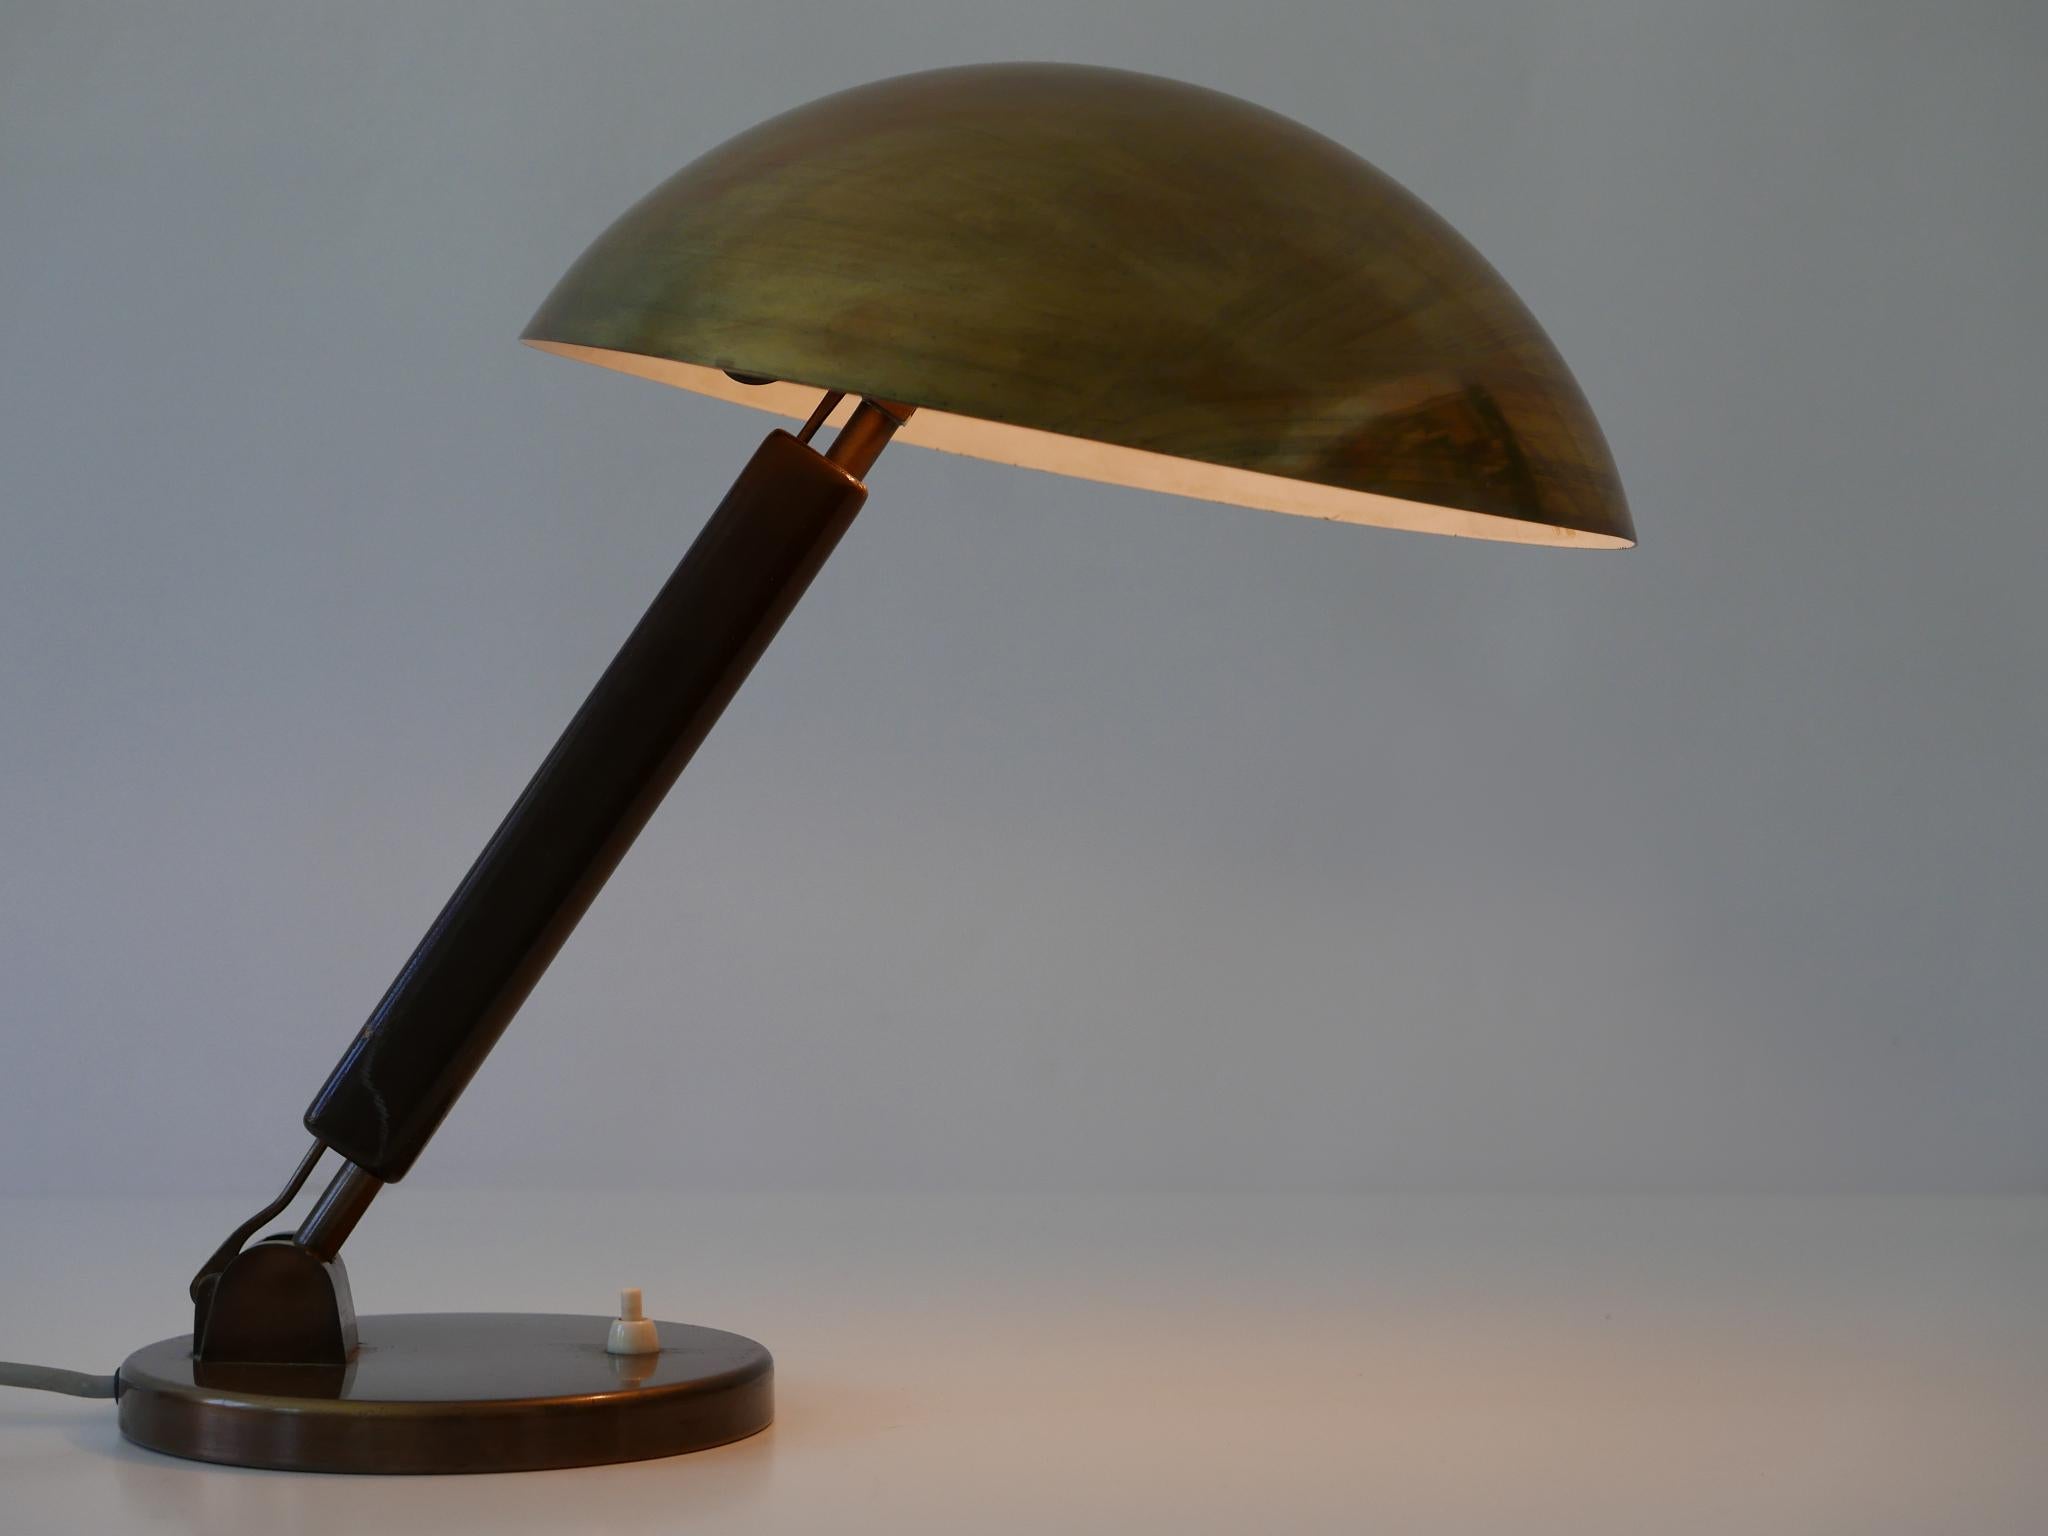 Exceptional and elegant Bauhaus / modernist table lamp or desk light. Designed by Karl Trabert for BAG Turgi, 1930s, Switzerland. Makers label inside the lamp shade.

Executed in brass and wood, the lamp comes with 1 x E27 / E26 Edison screw fit